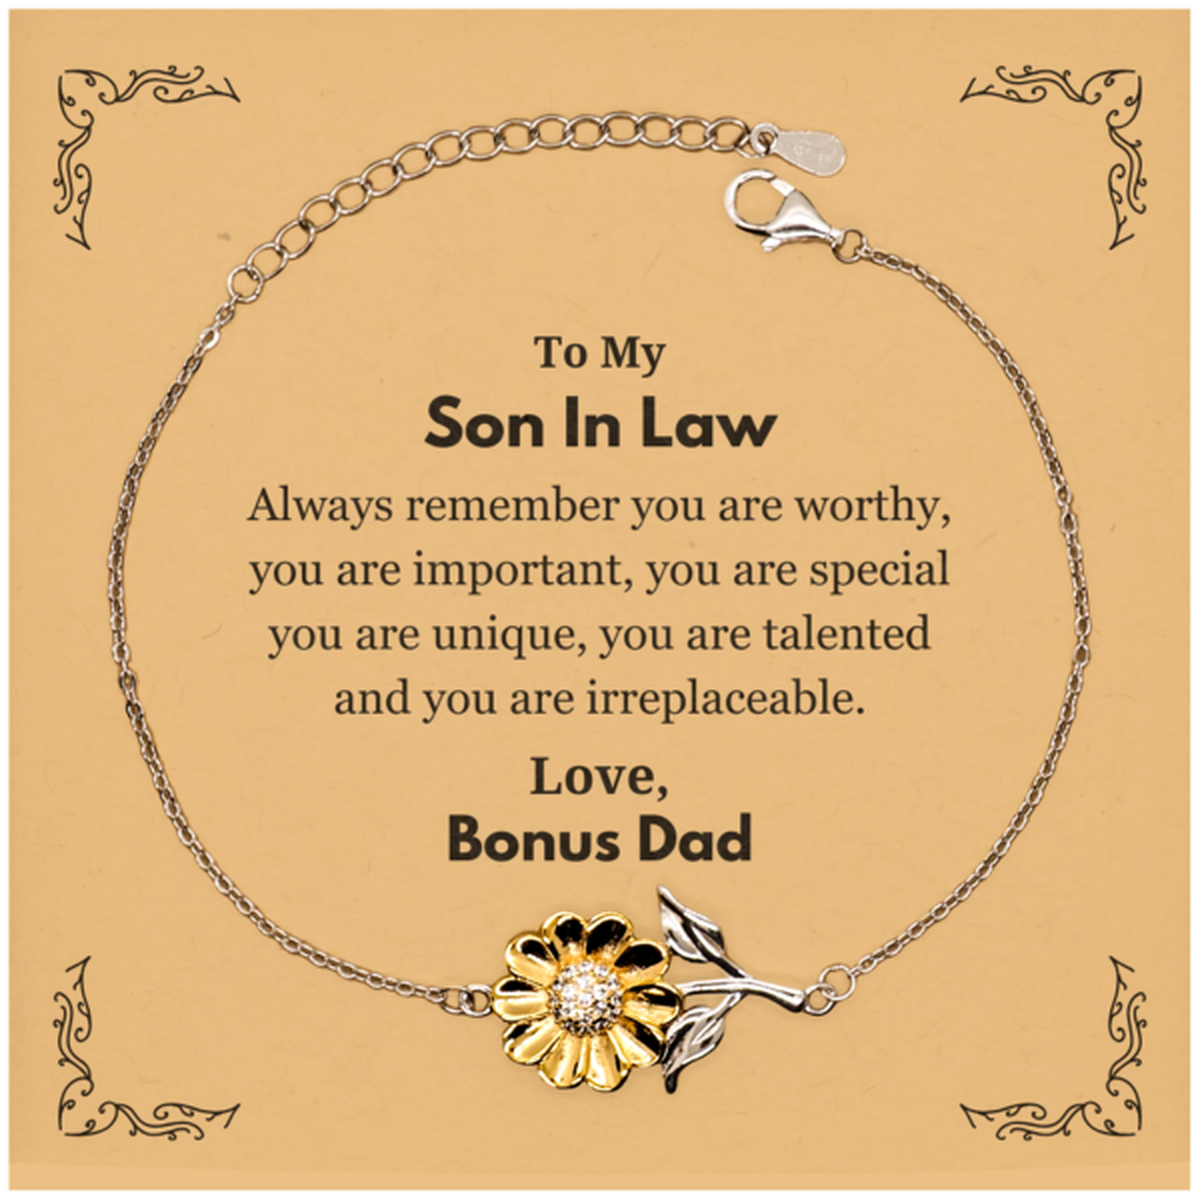 Son In Law Birthday Gifts from Bonus Dad, Inspirational Sunflower Bracelet for Son In Law Christmas Graduation Gifts for Son In Law Always remember you are worthy, you are important. Love, Bonus Dad